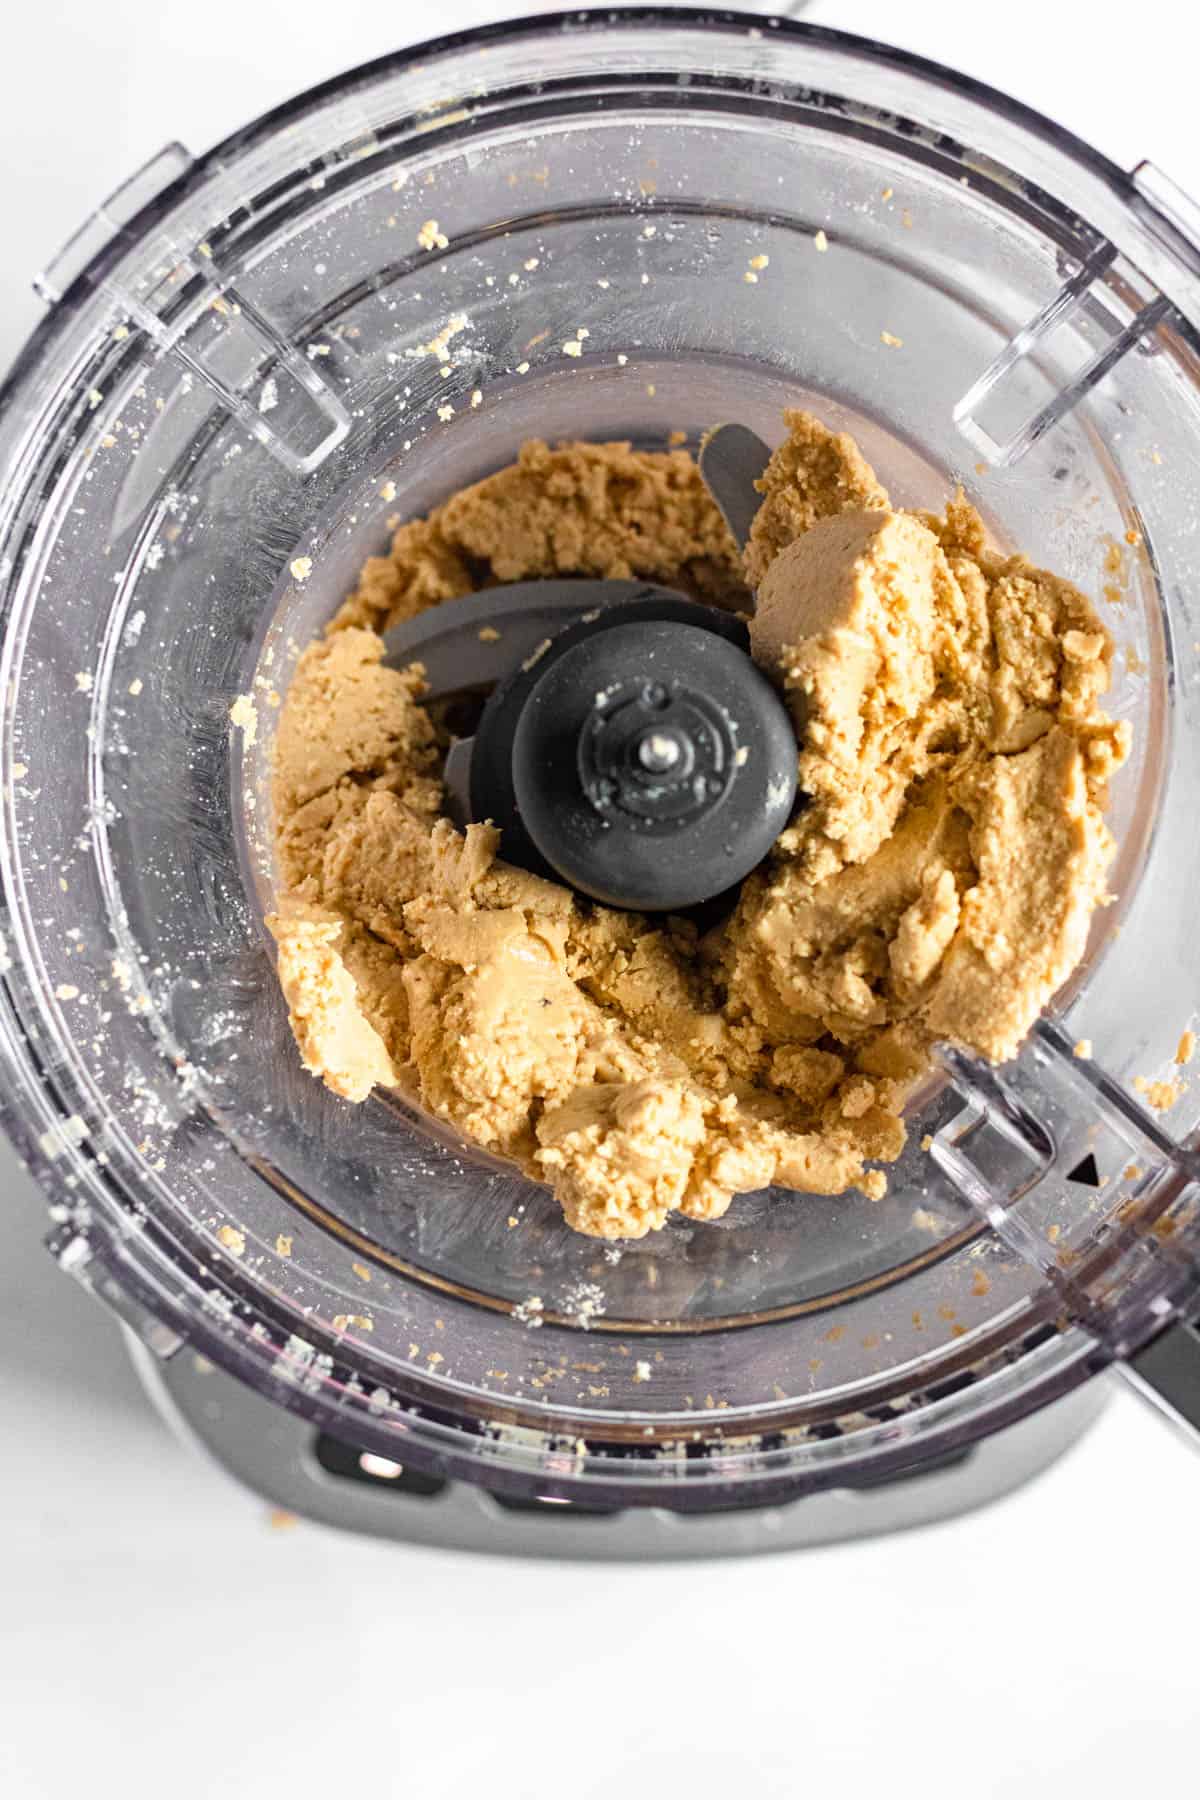 cashew butter in a food processor forming a spread